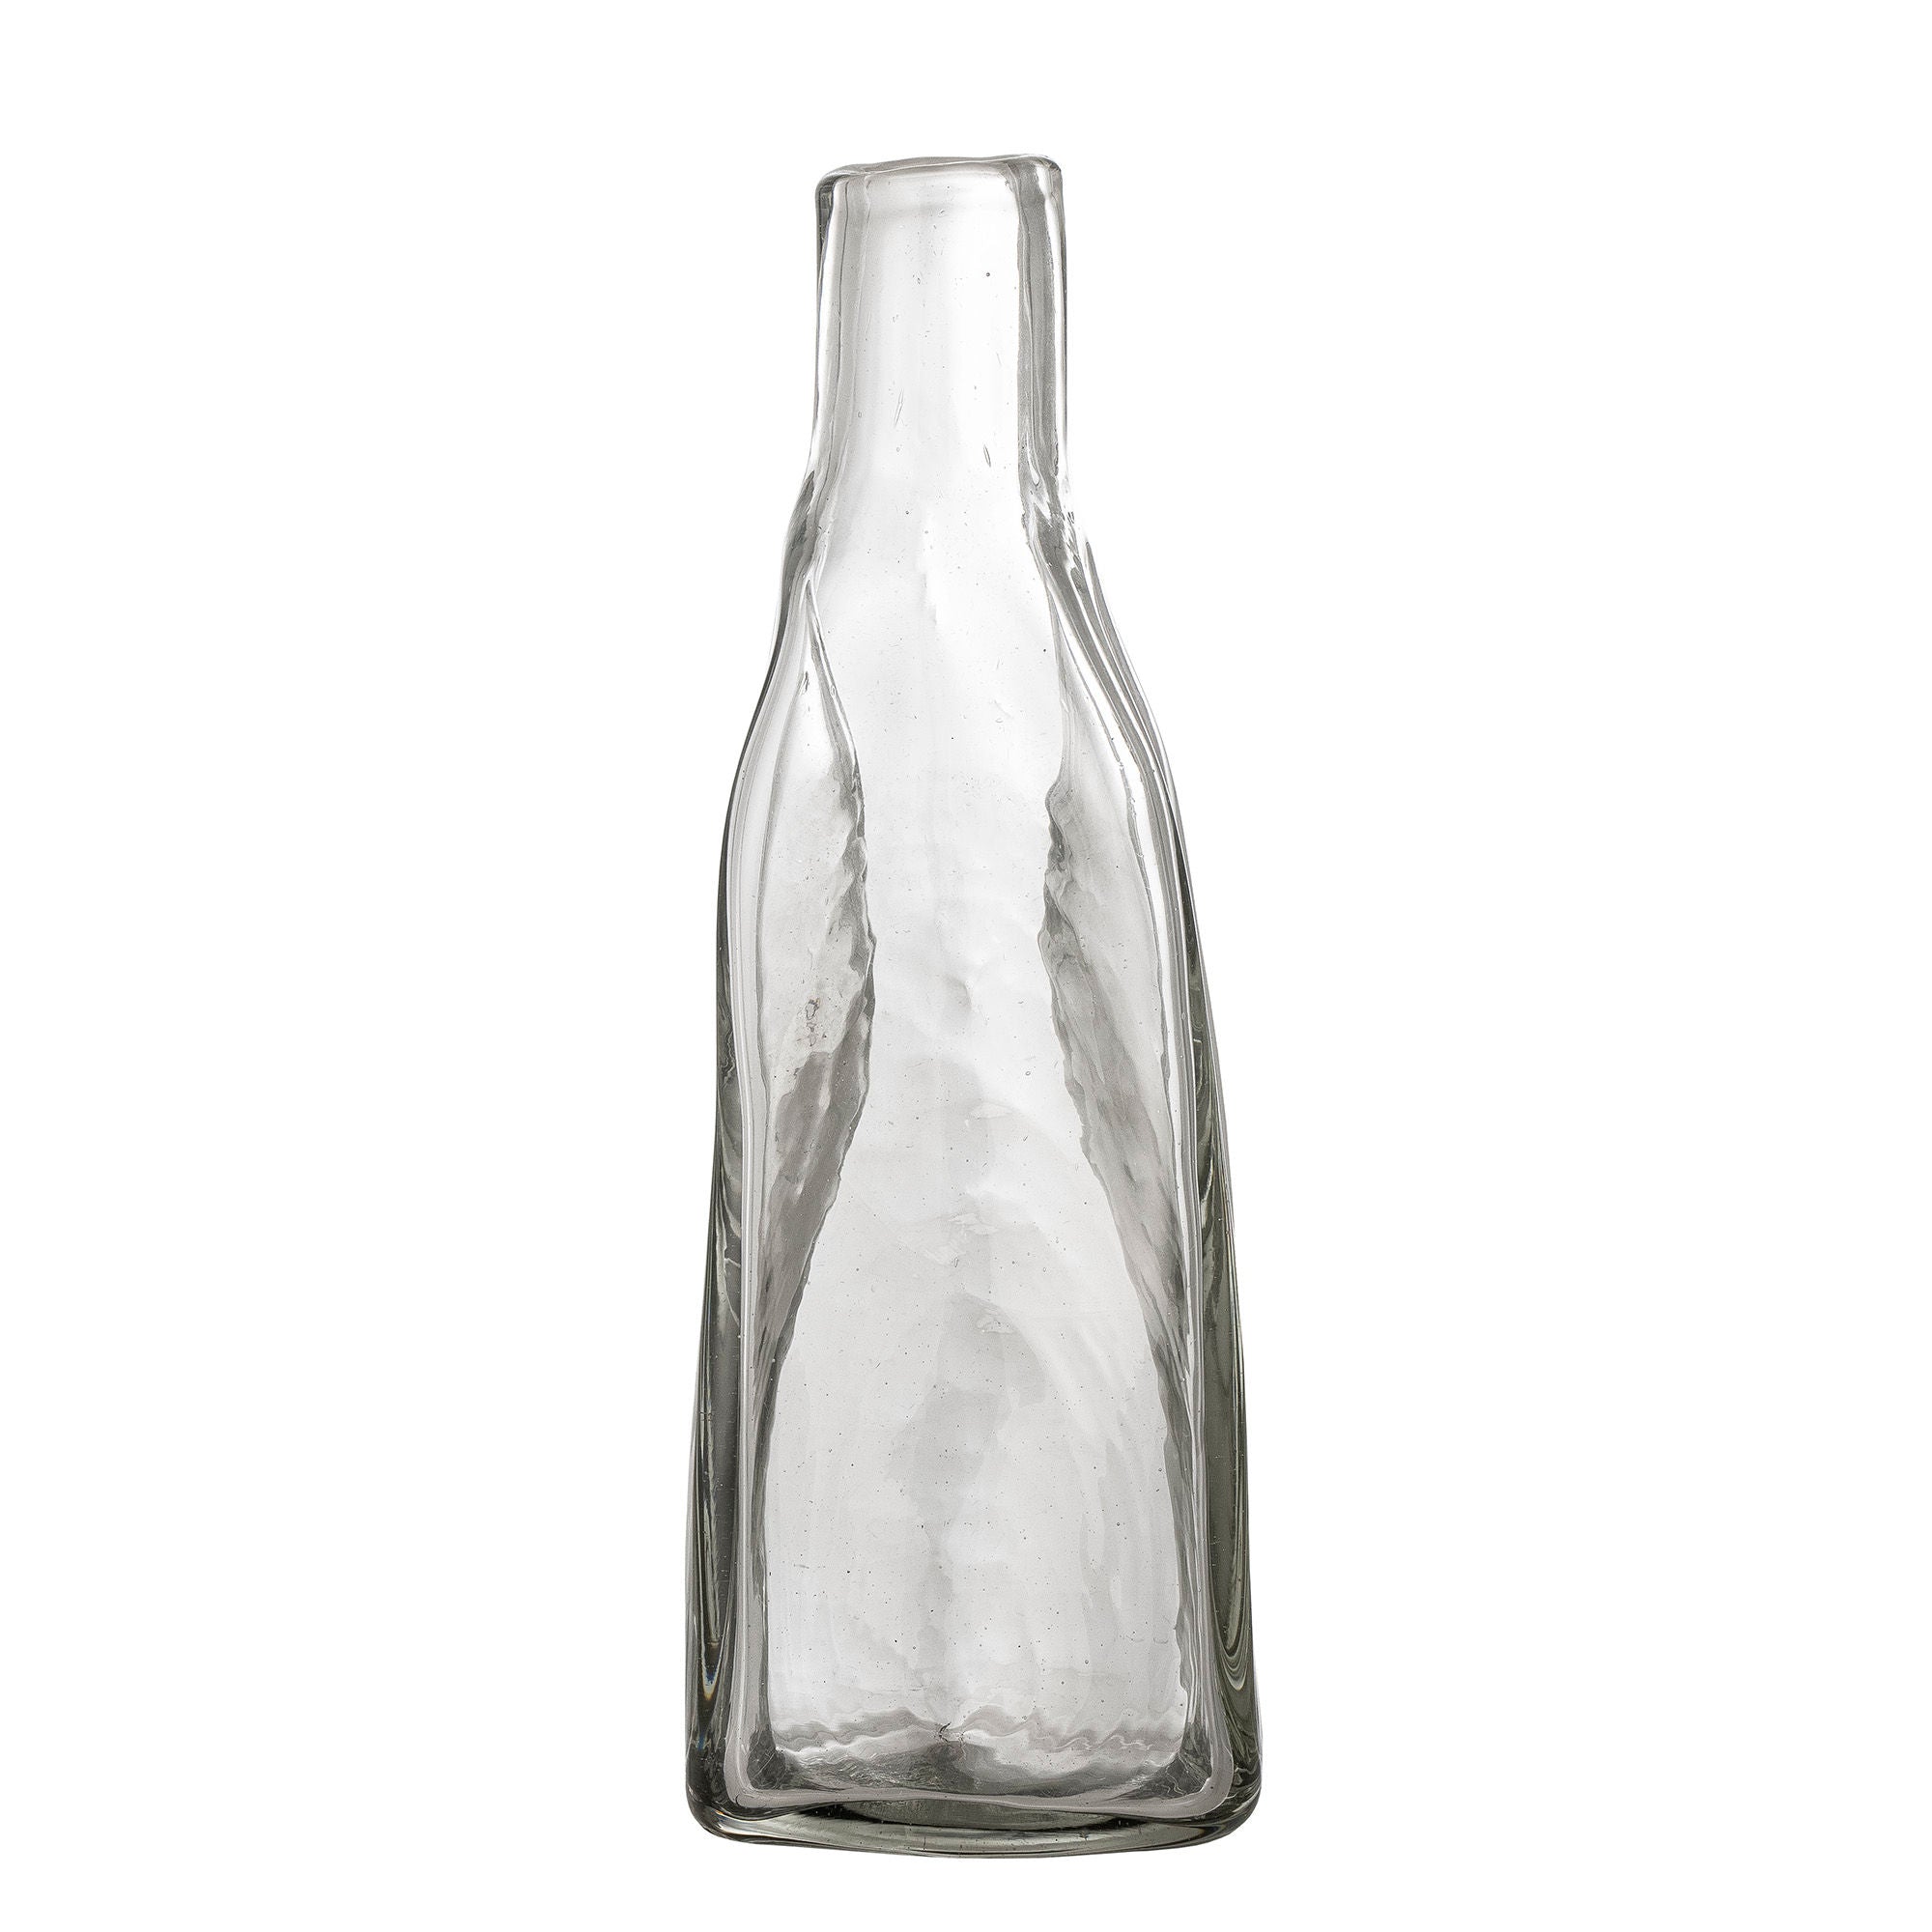 Creative Collection Lenka Decanter, Clear, Recycled Glass